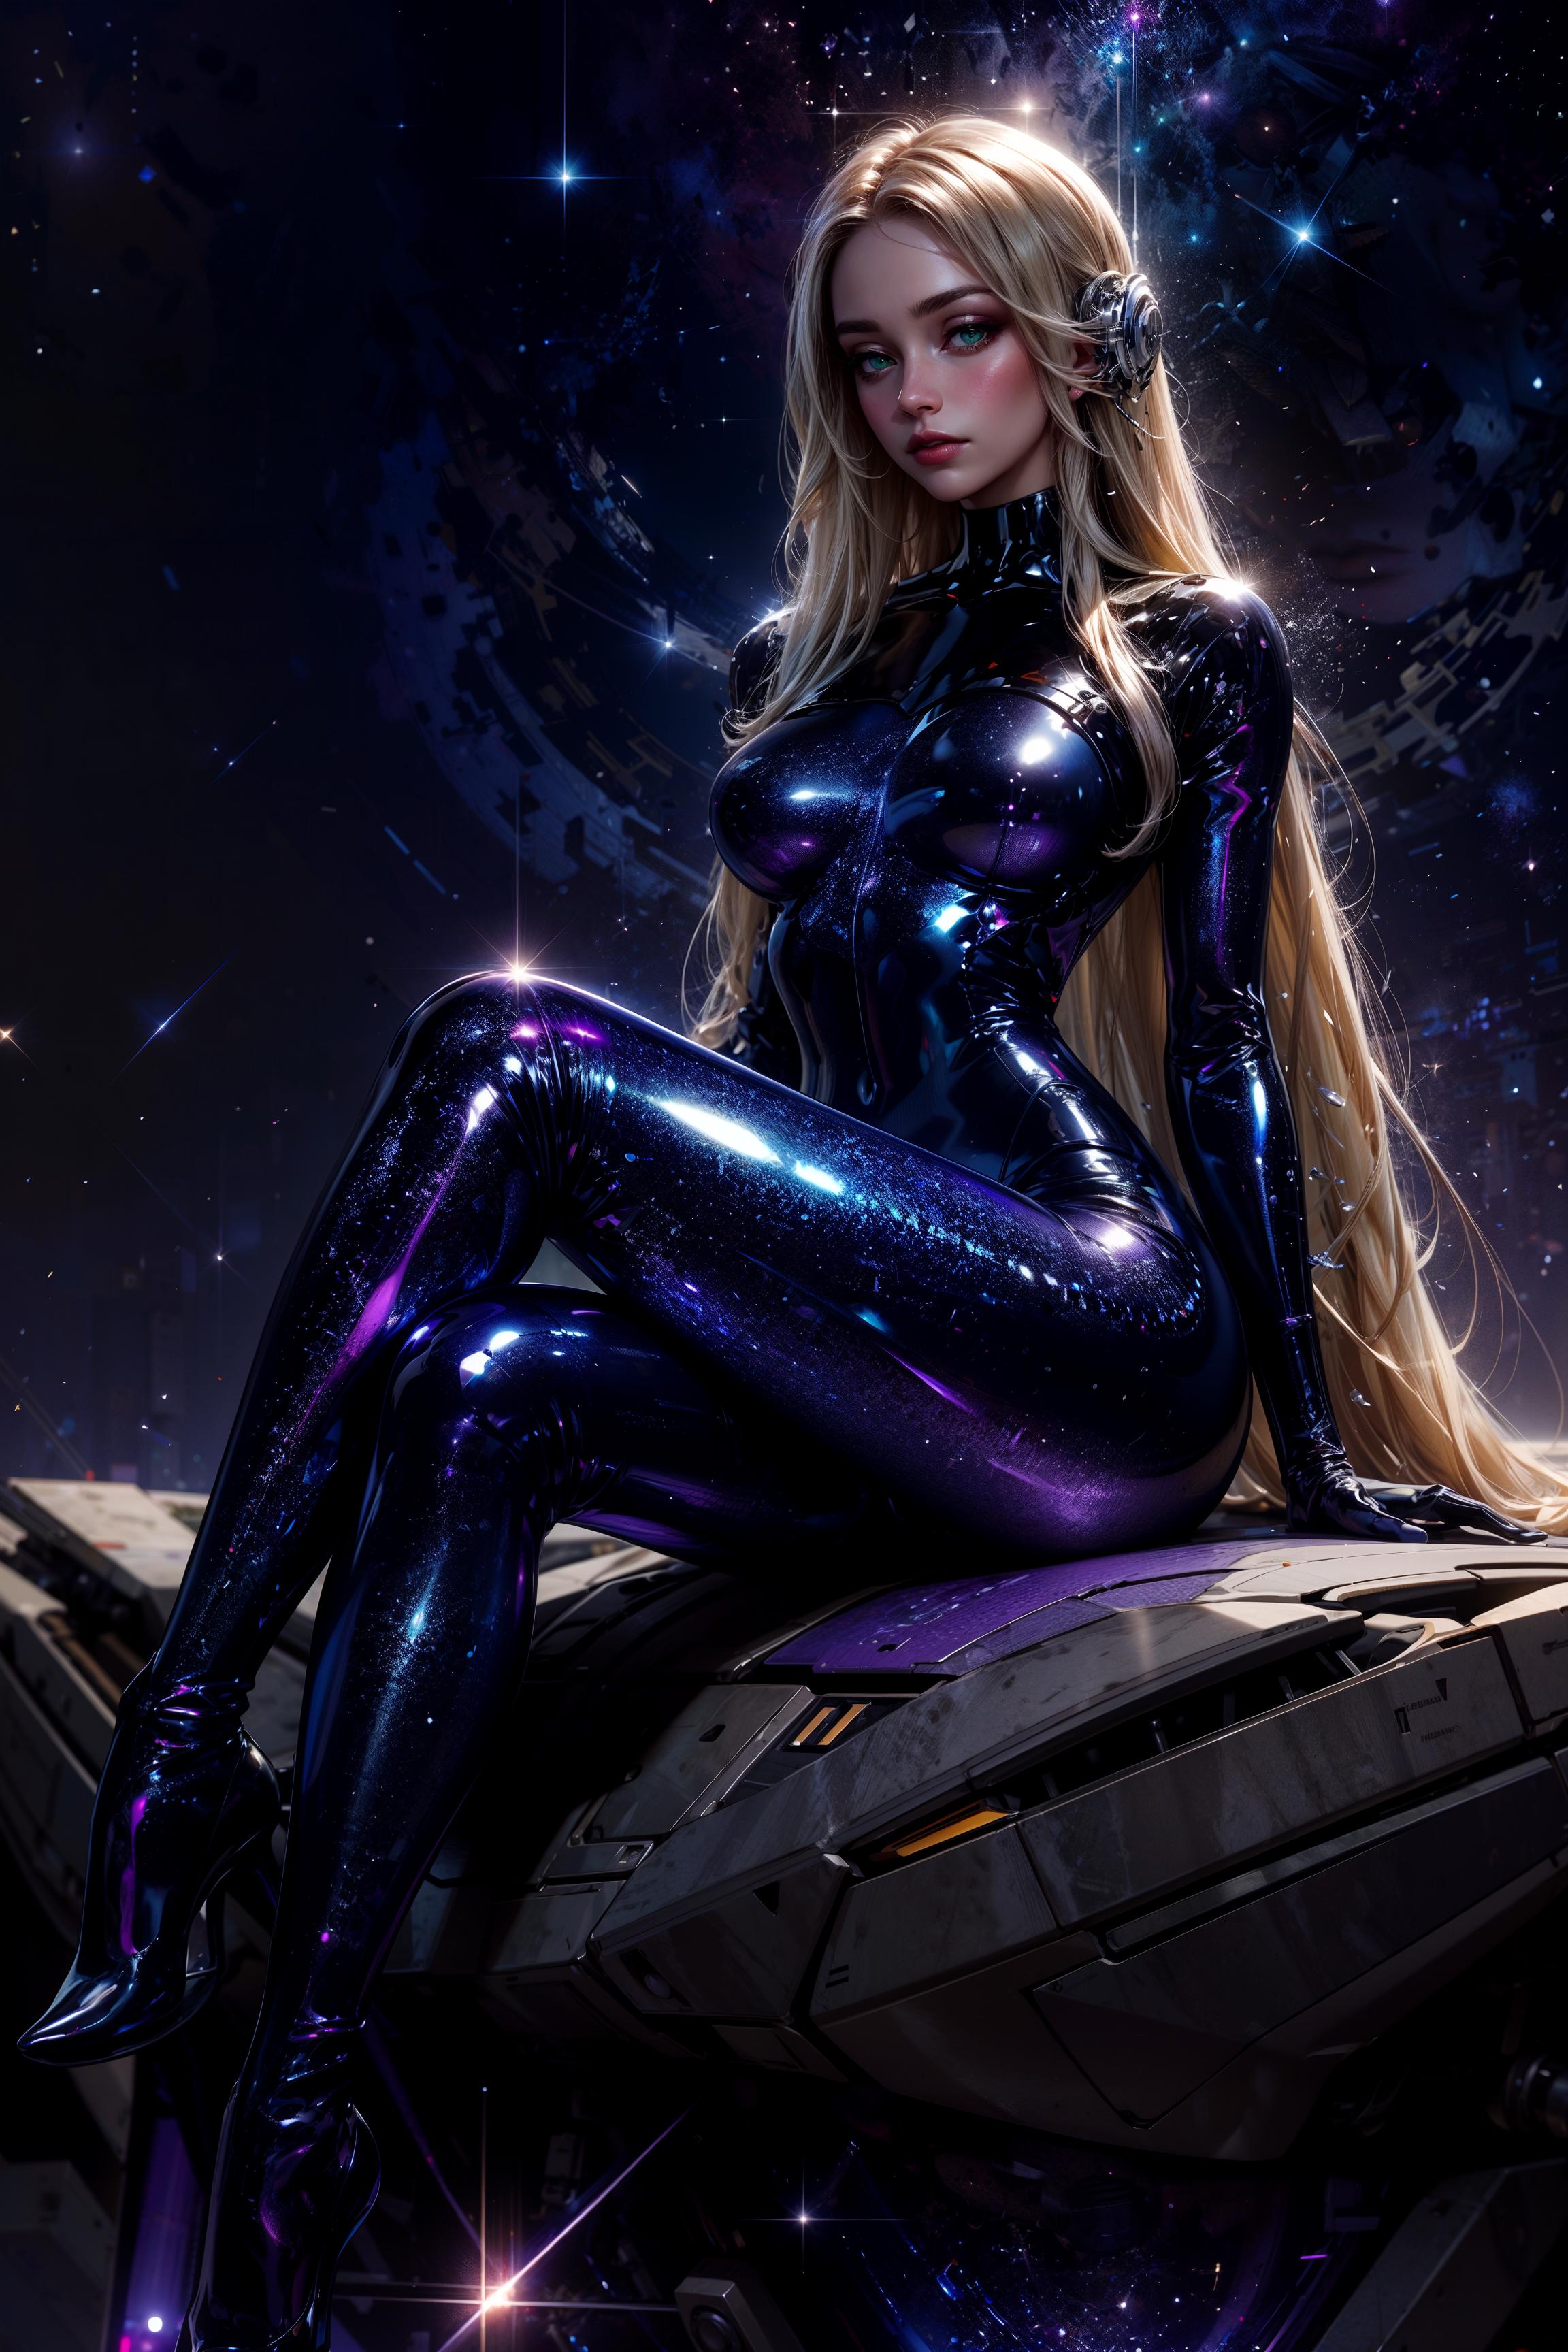 A cartoon illustration of a woman in a purple latex outfit sitting on a space ship.